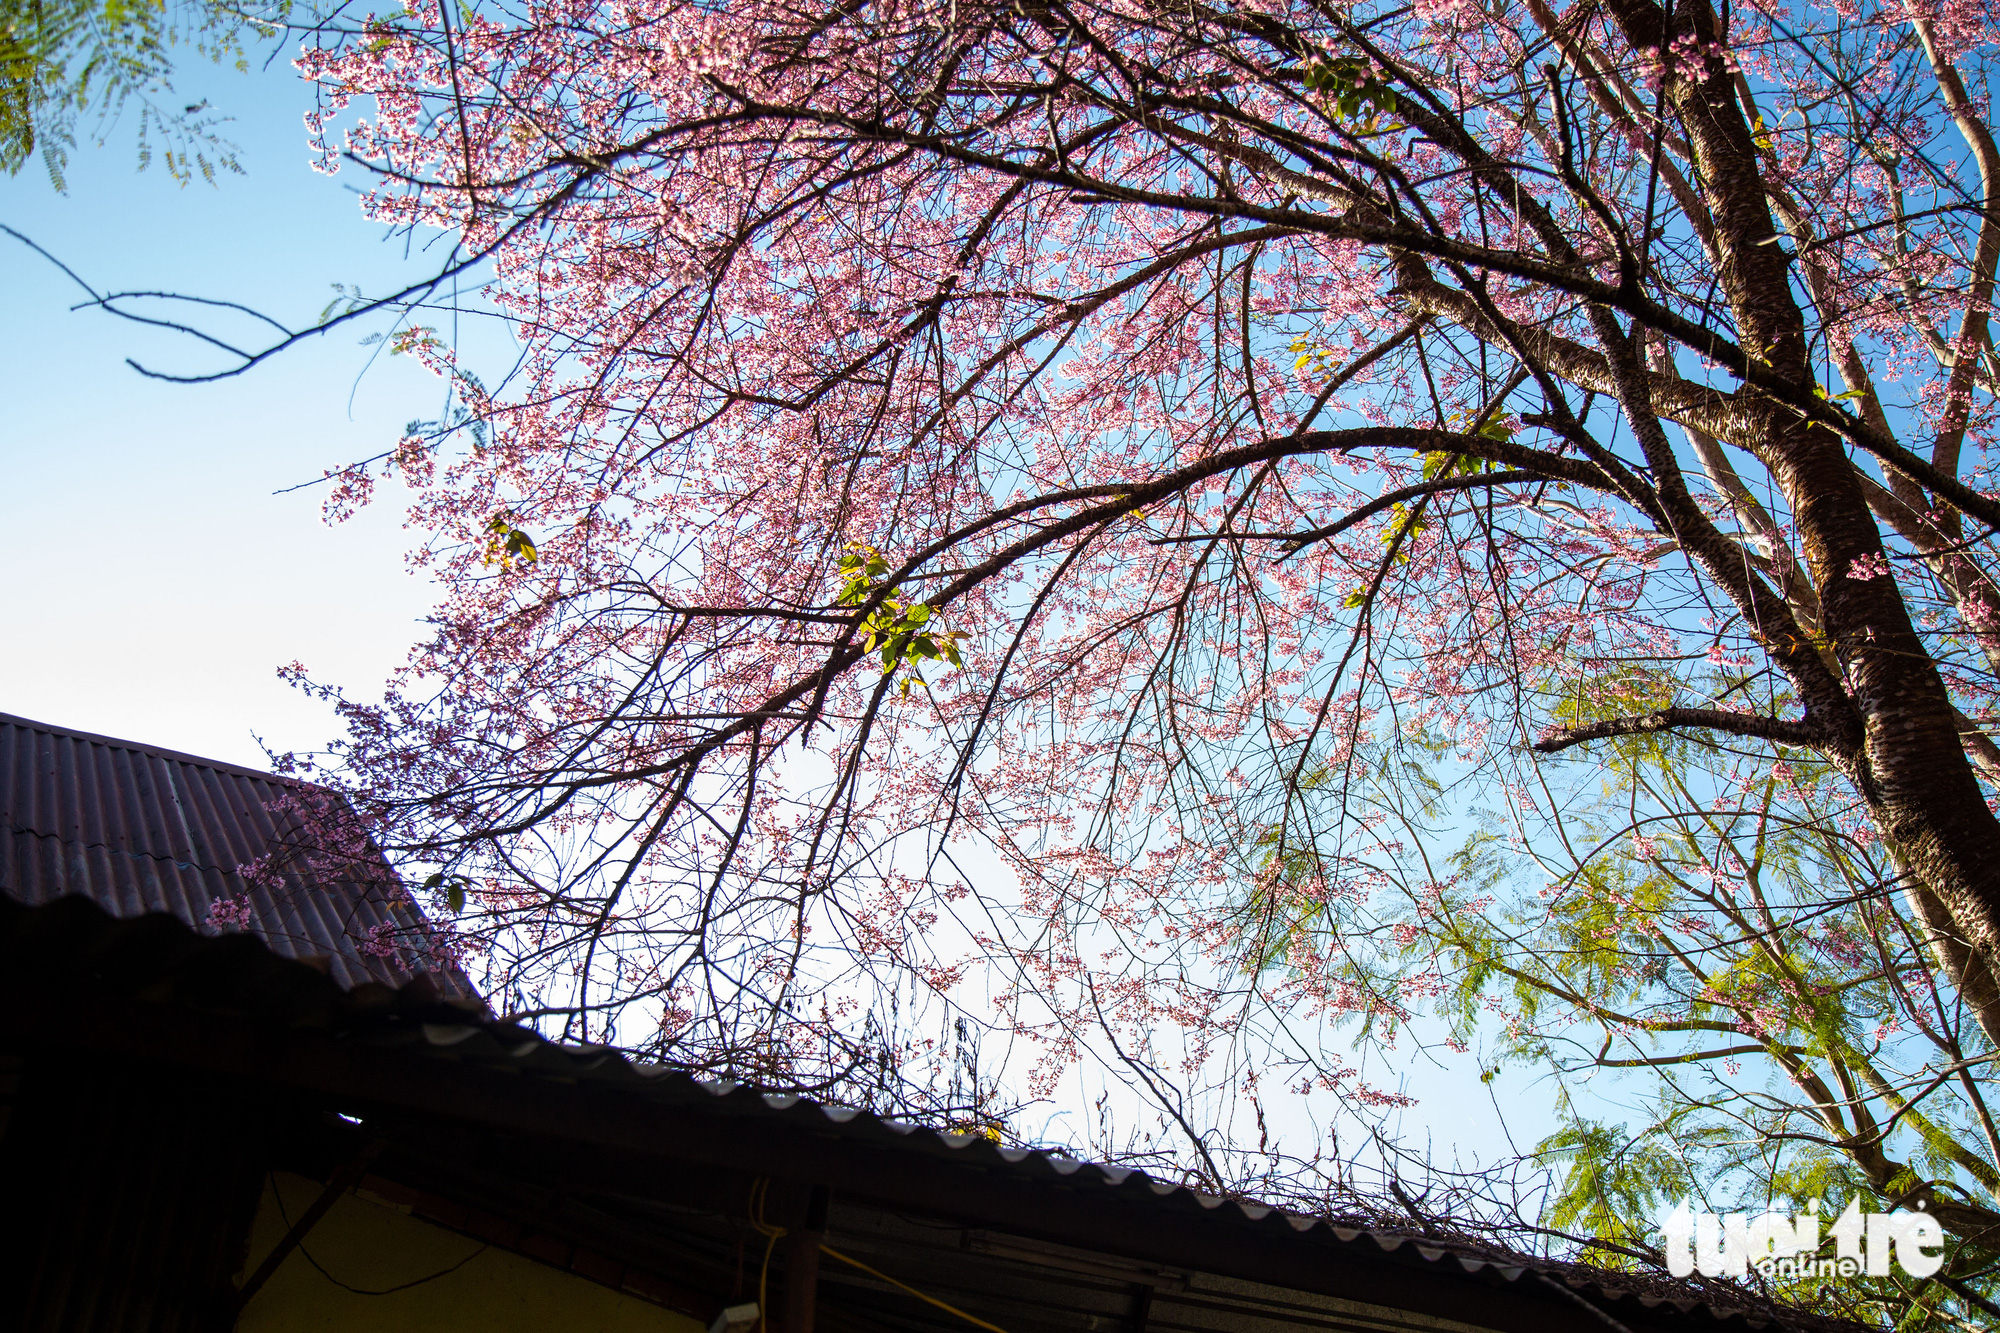 Blooming apricot trees above the roof of a house in Da Lat City, Lam Dong Province, Vietnam. Photo: Tuoi Tre